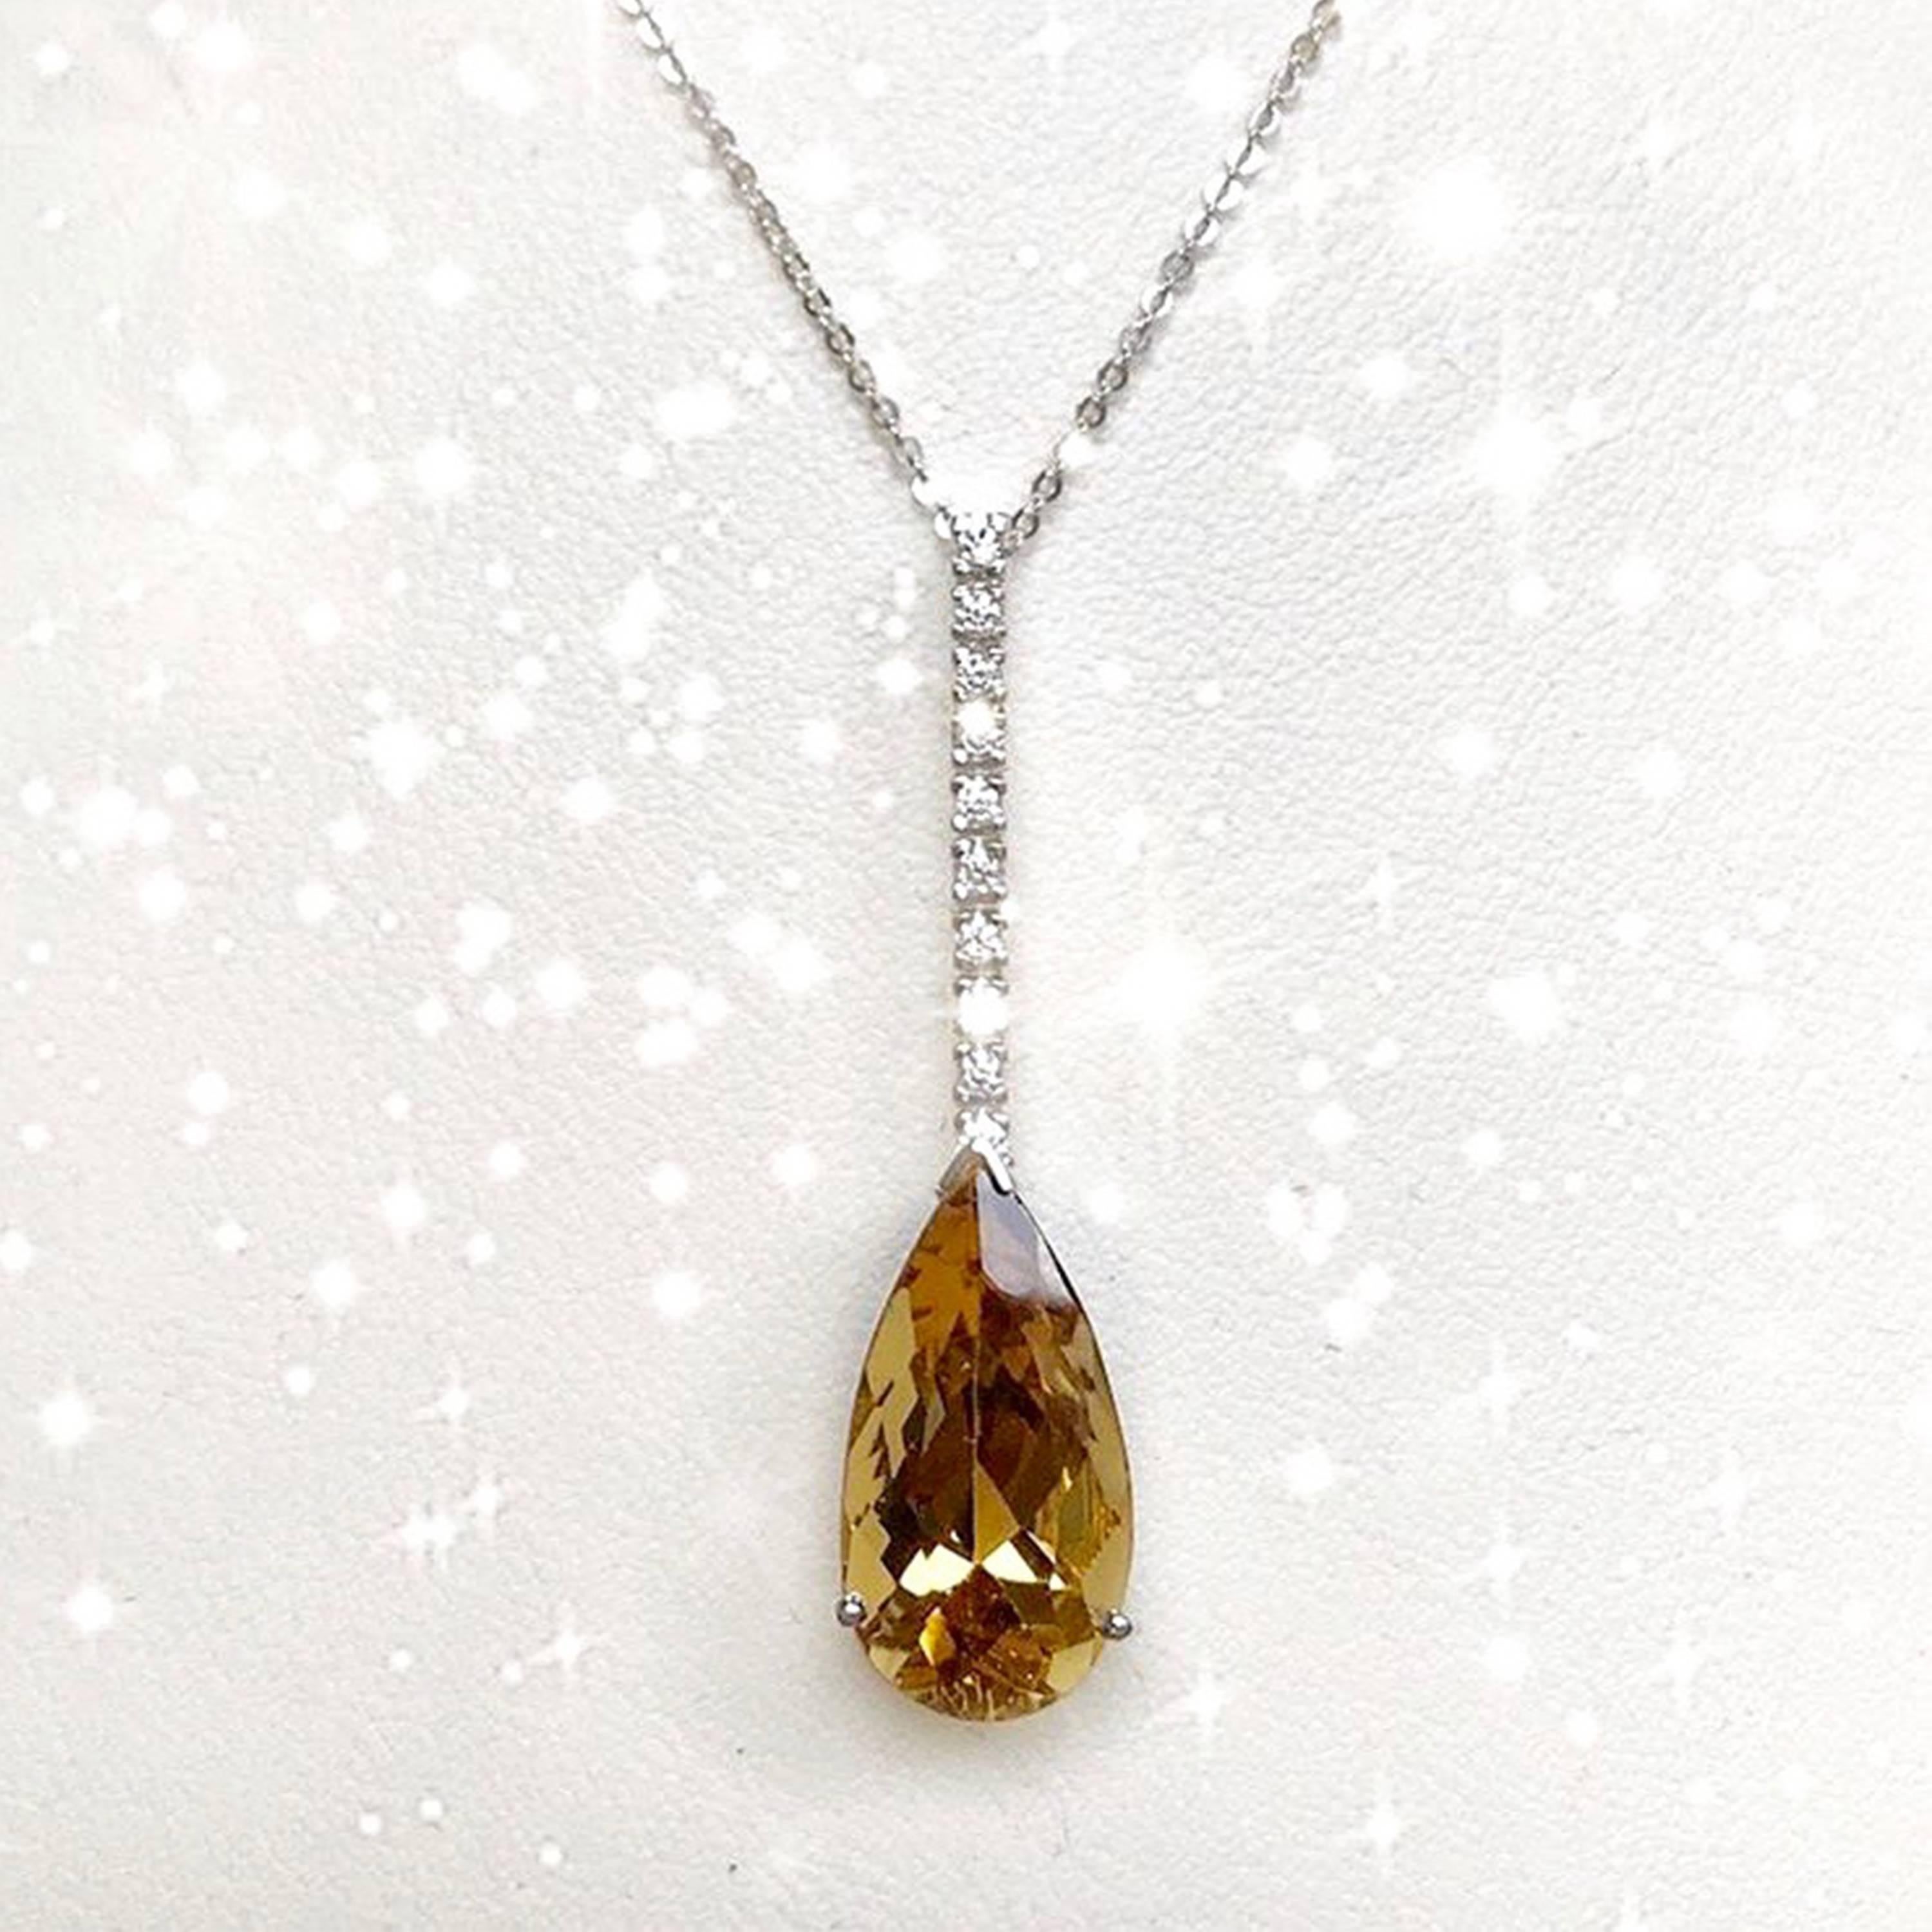 Material: 14k White Gold 
Center Stone Details: 7.41 Carat Pear Shaped Yellow Beryl - 18 x 10 mm
Diamonds:  10 Round Diamonds at 0.15 Carats.  SI Quality /  H-I Color
Chain:  18 Inch
Fine one-of-a kind craftsmanship meets incredible quality in this